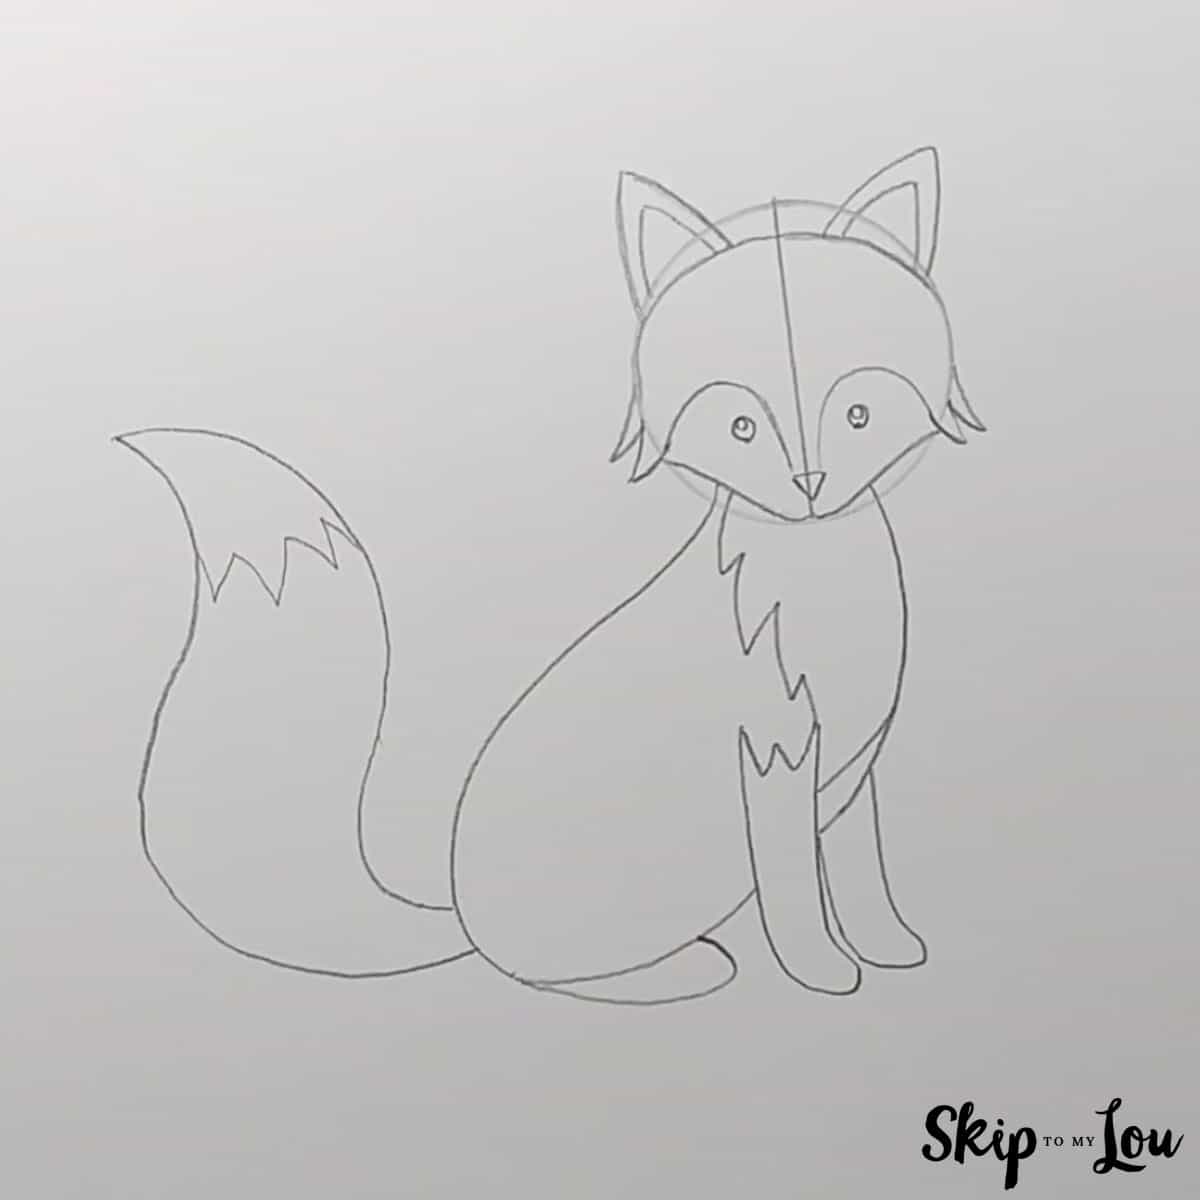 How to Draw a Fox- Skip to my Lou Tutorial - Step 6 - Add bushy tail and fur patterns.